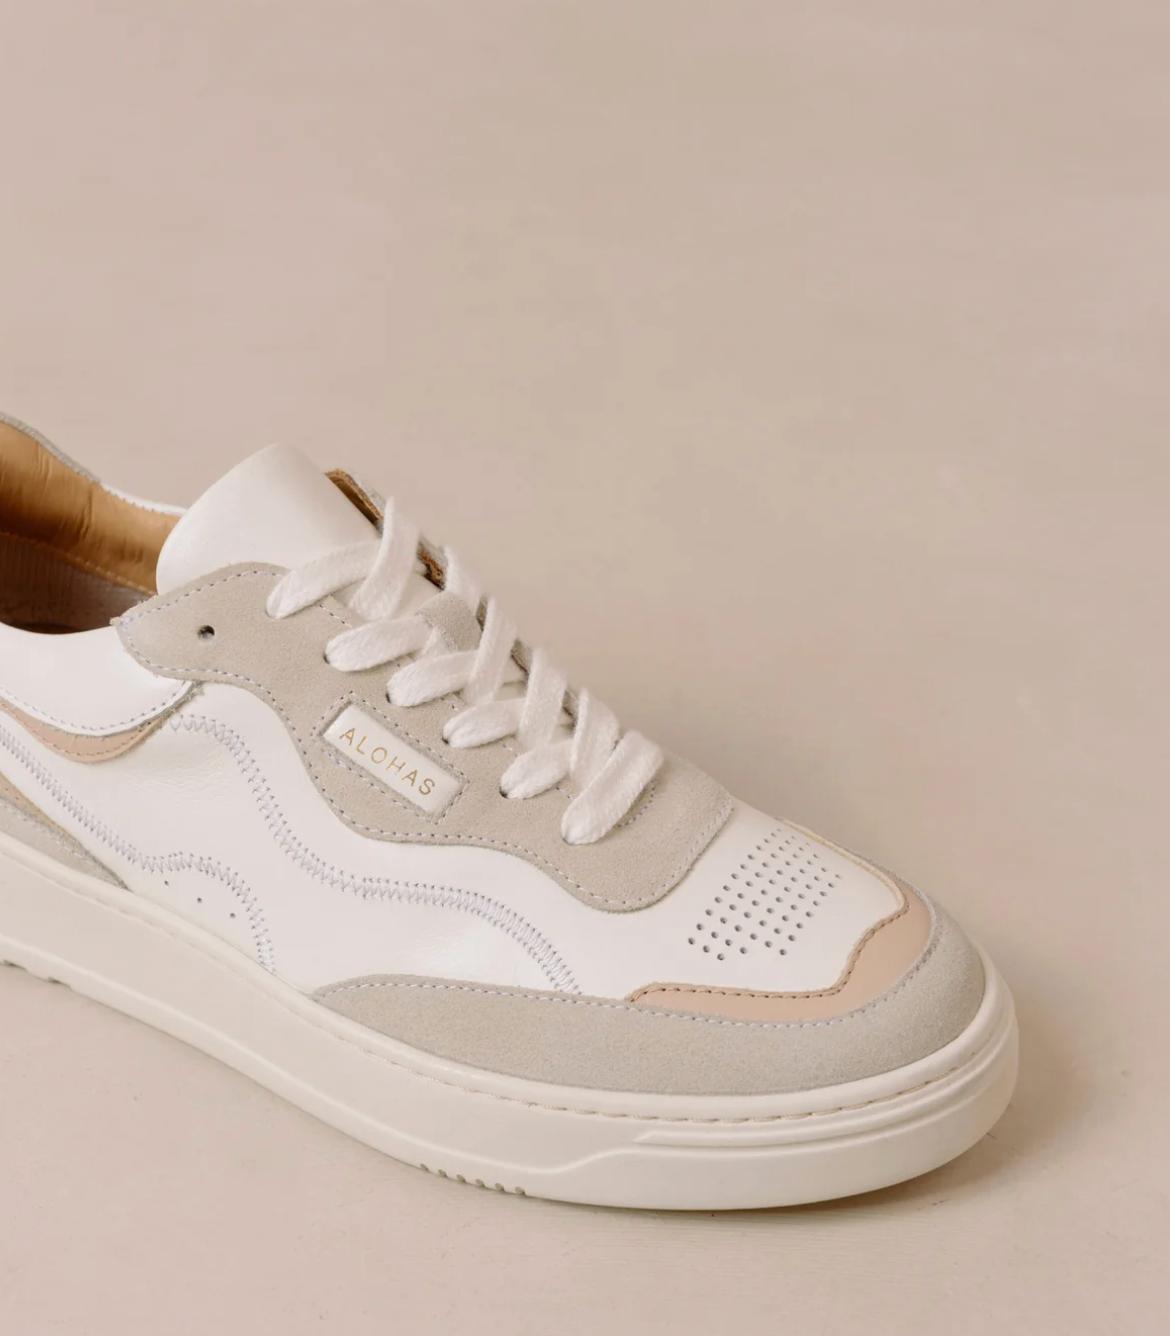 alohas tb.87 leather sneaker shoe in quarry